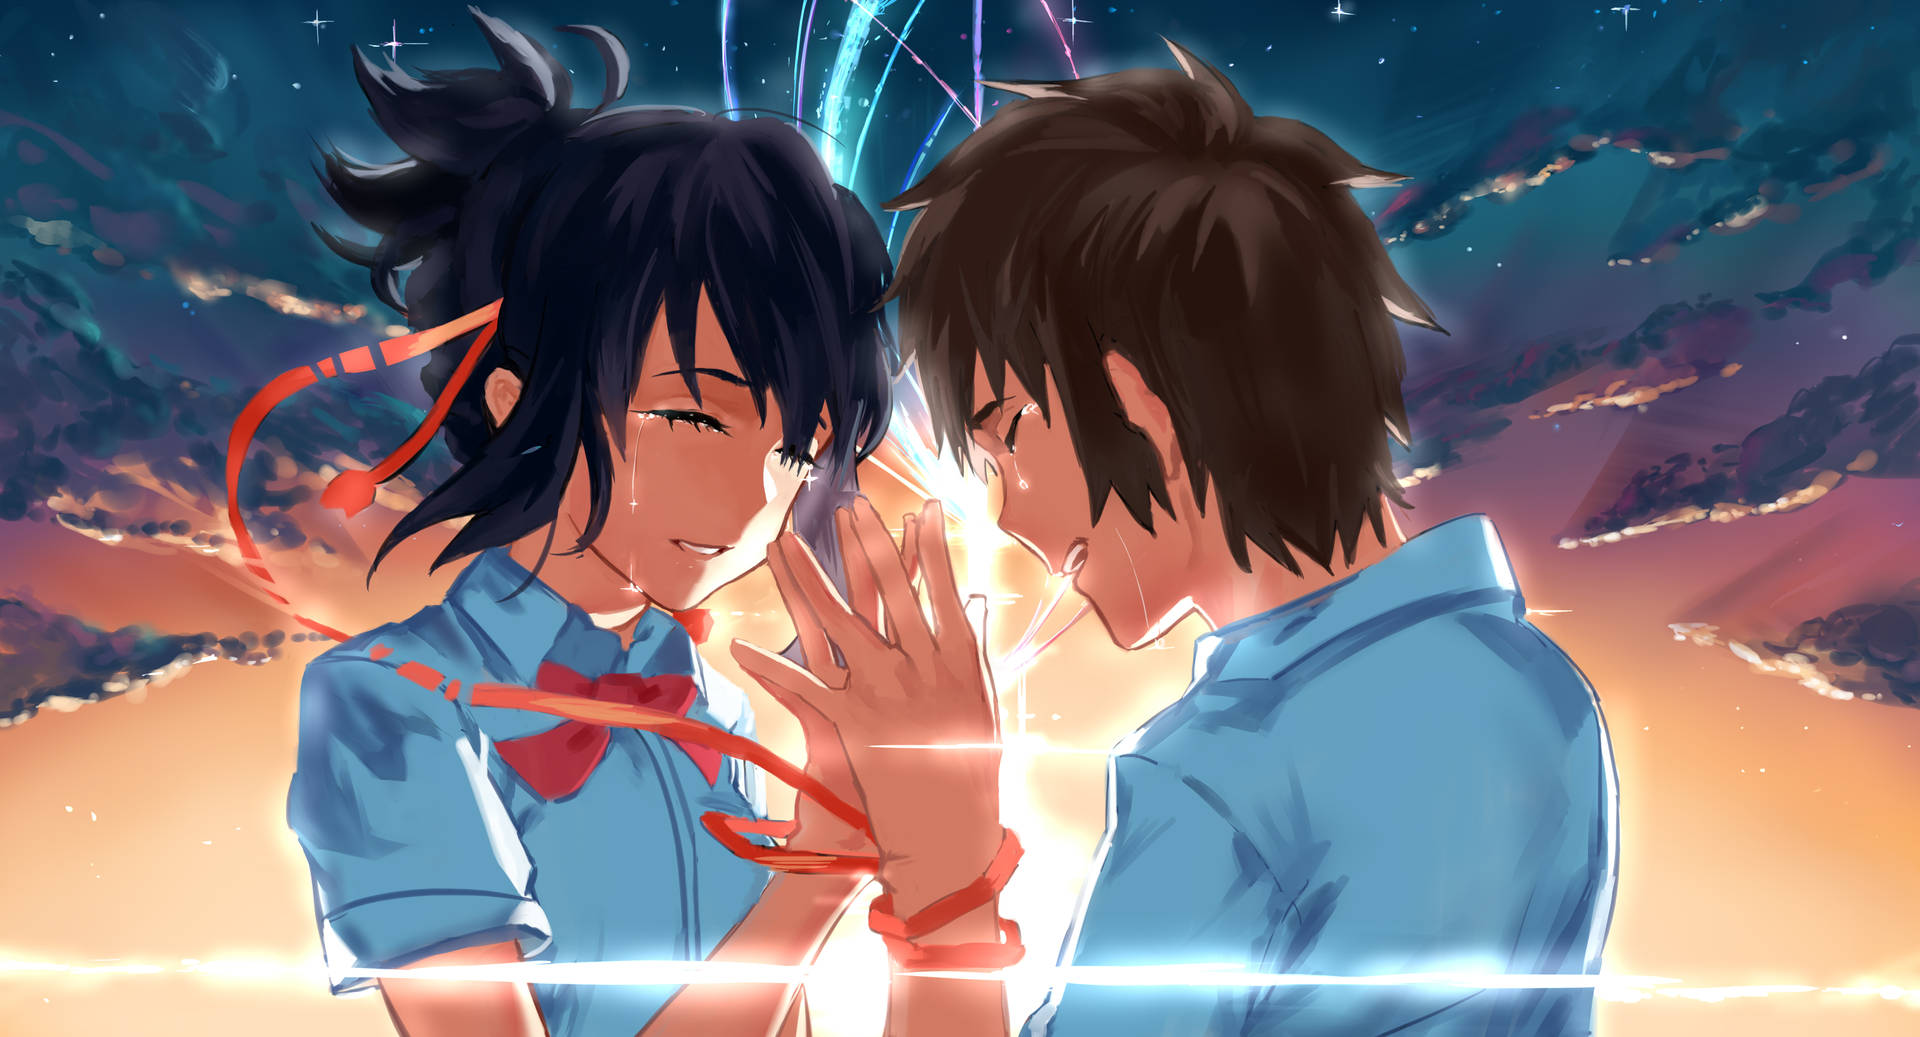 An Emotional Moment Between Taki&Mitsuha in 'Your Name' 4K Wallpaper